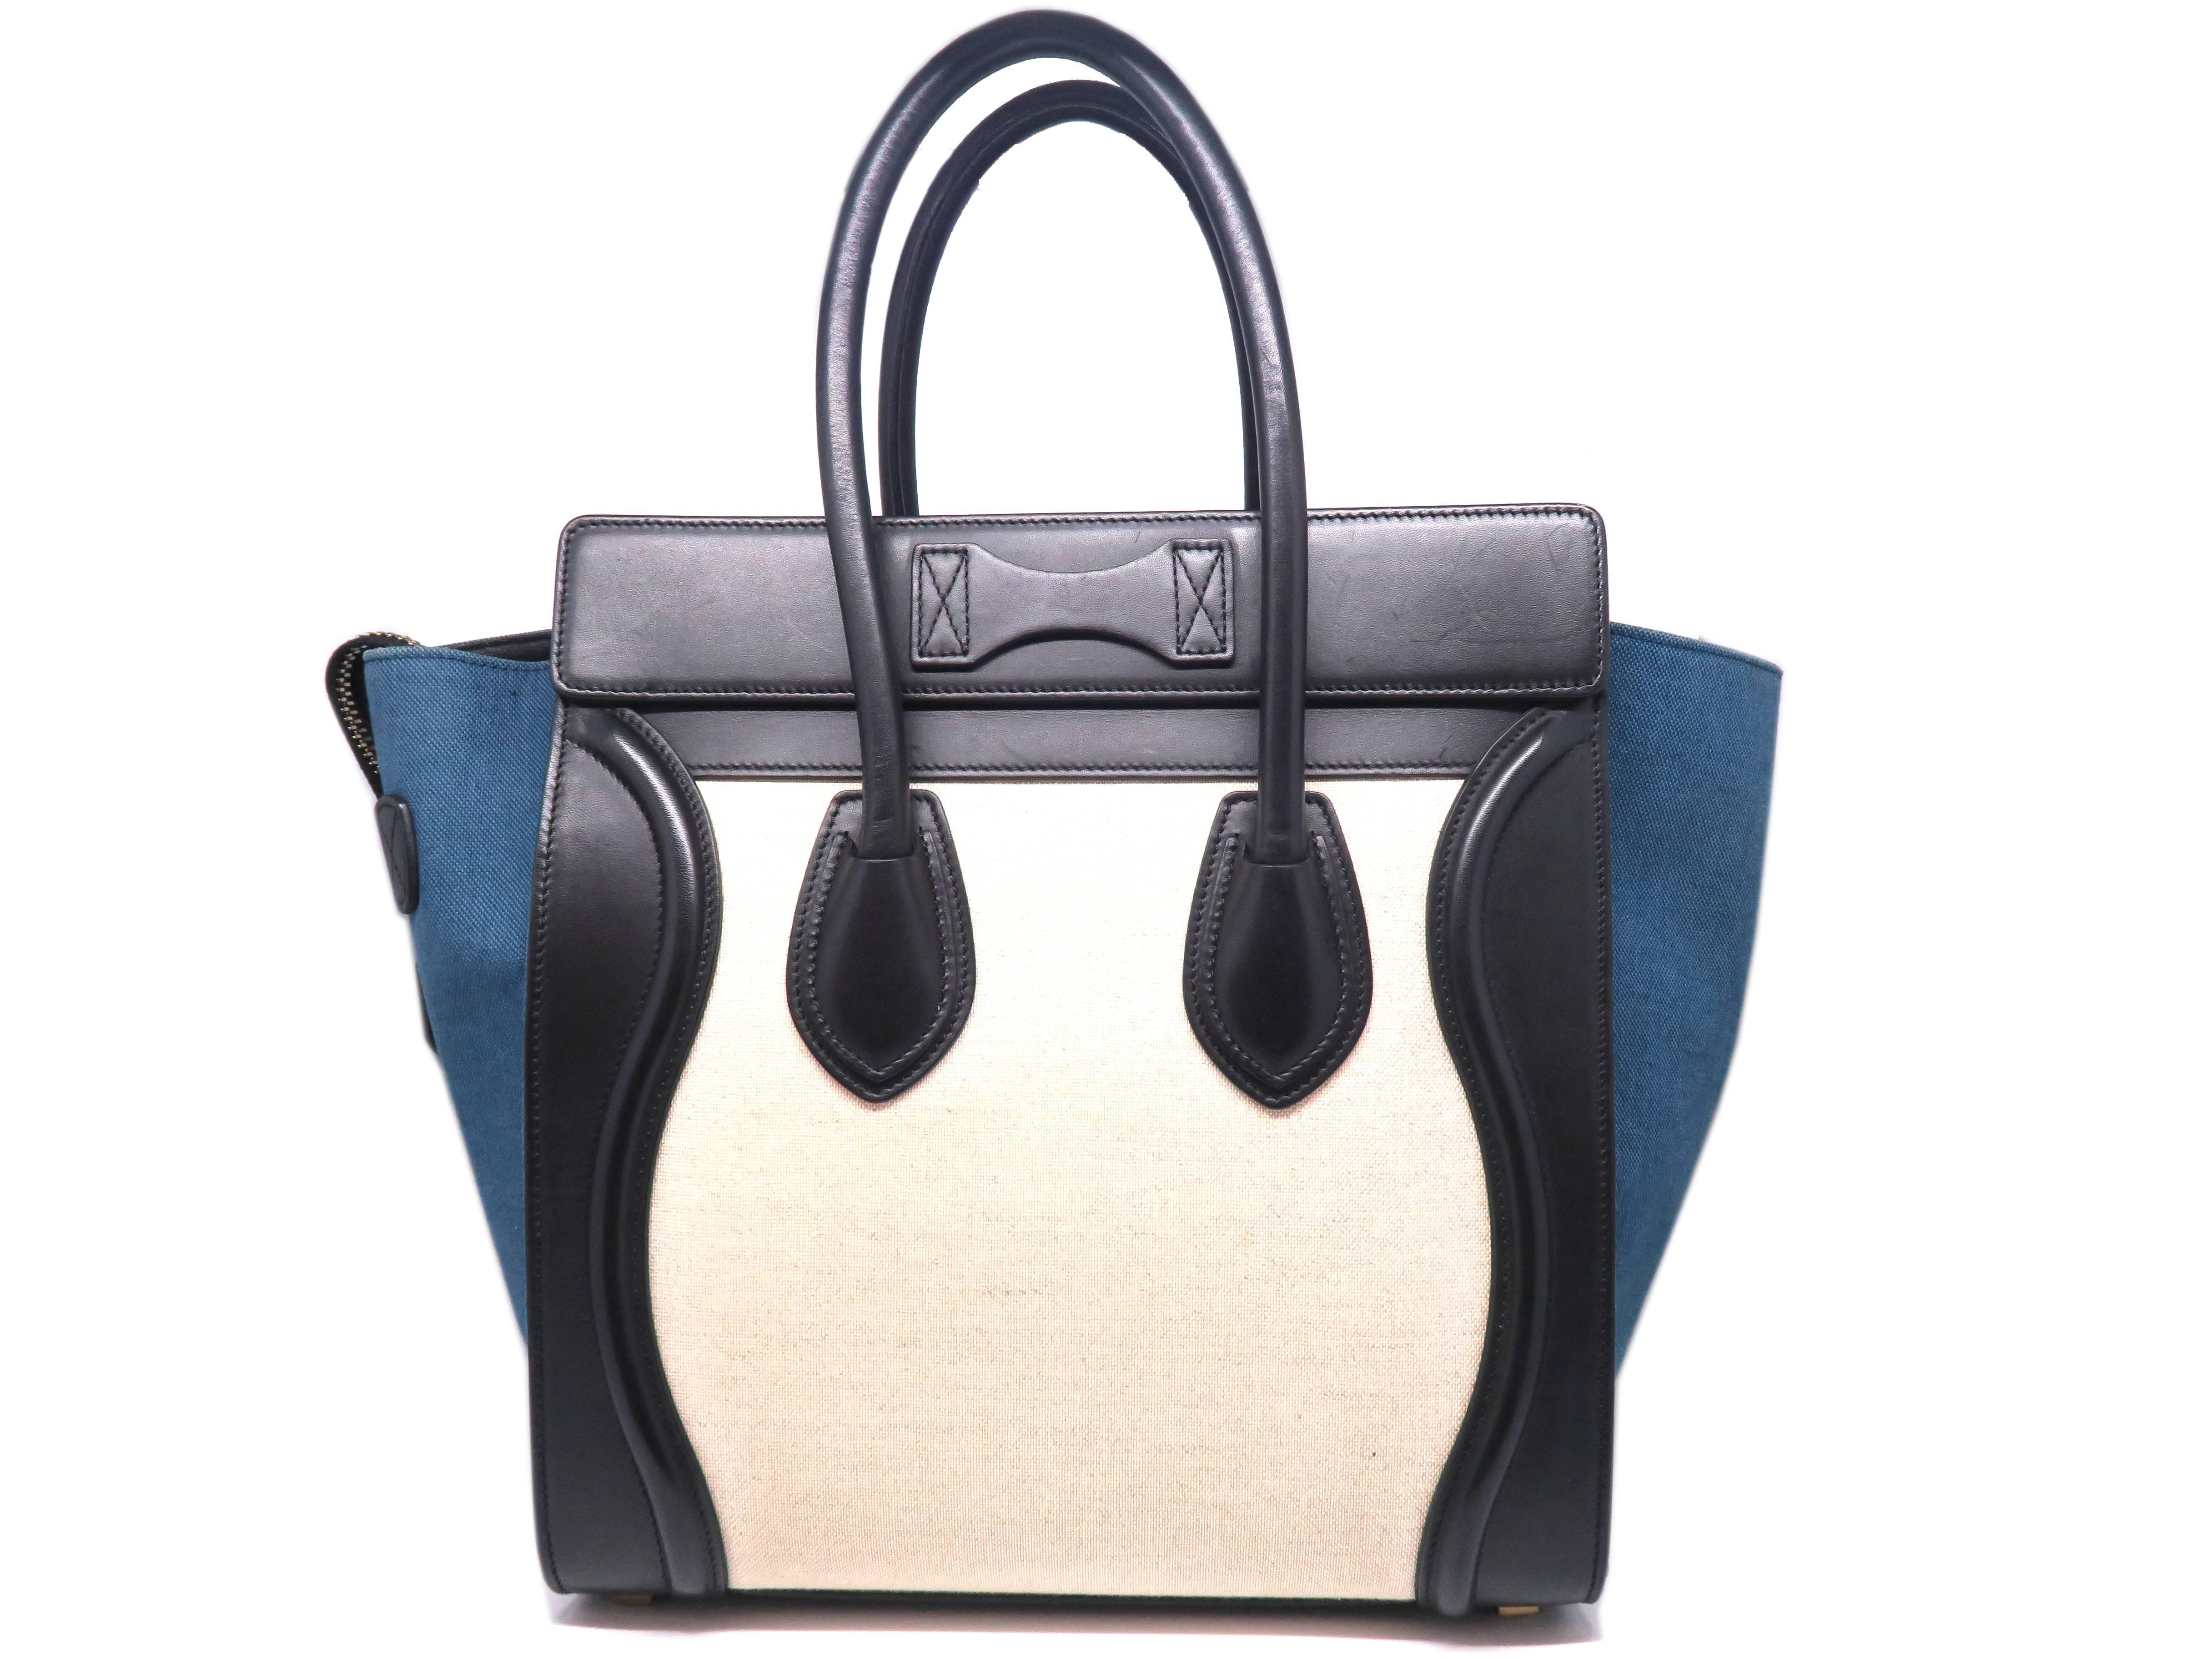 Celine Lugguage Black/ Beige Calfskin Leather Handbag In Excellent Condition For Sale In Kowloon, HK